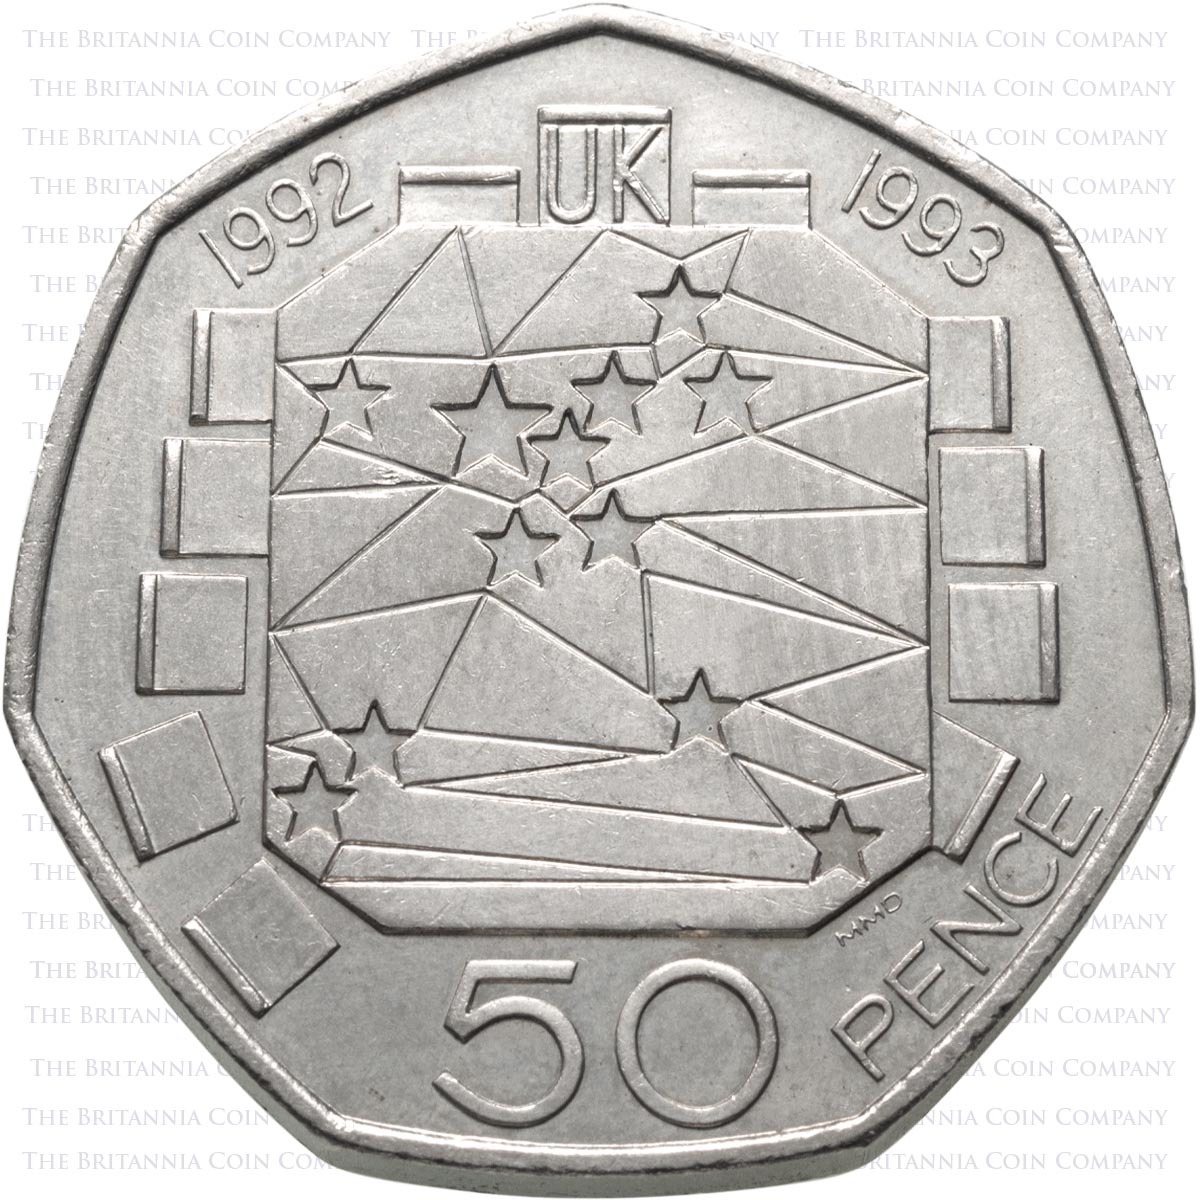 1992-1993 Dual Dated European Presidency Single Market Circulated Fifty Pence Coin Reverse